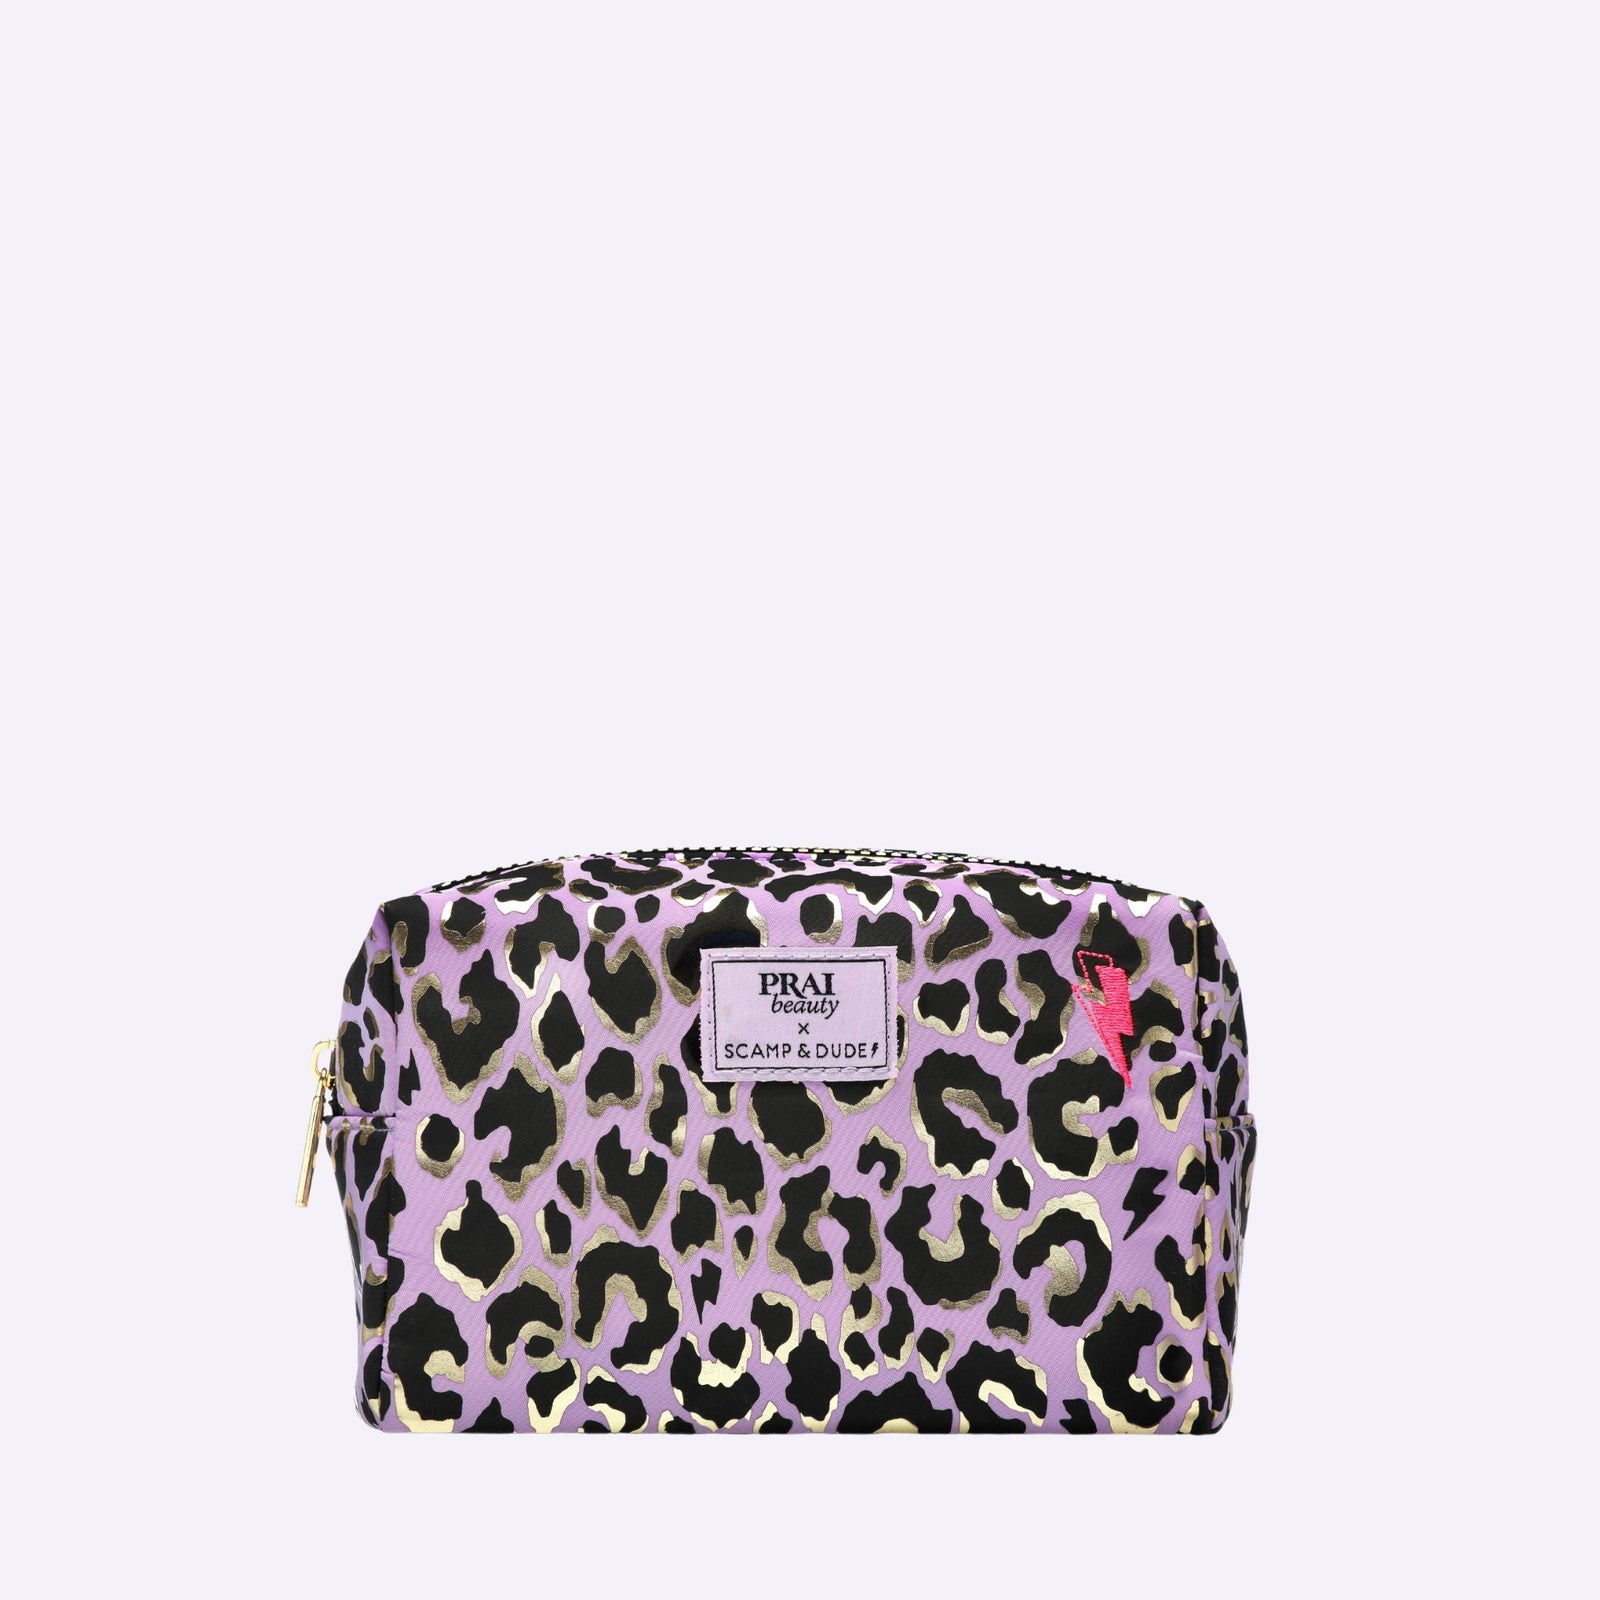 🎁 Scamp & Dude x PRAI Beauty Limited Edition Bag (100% off)